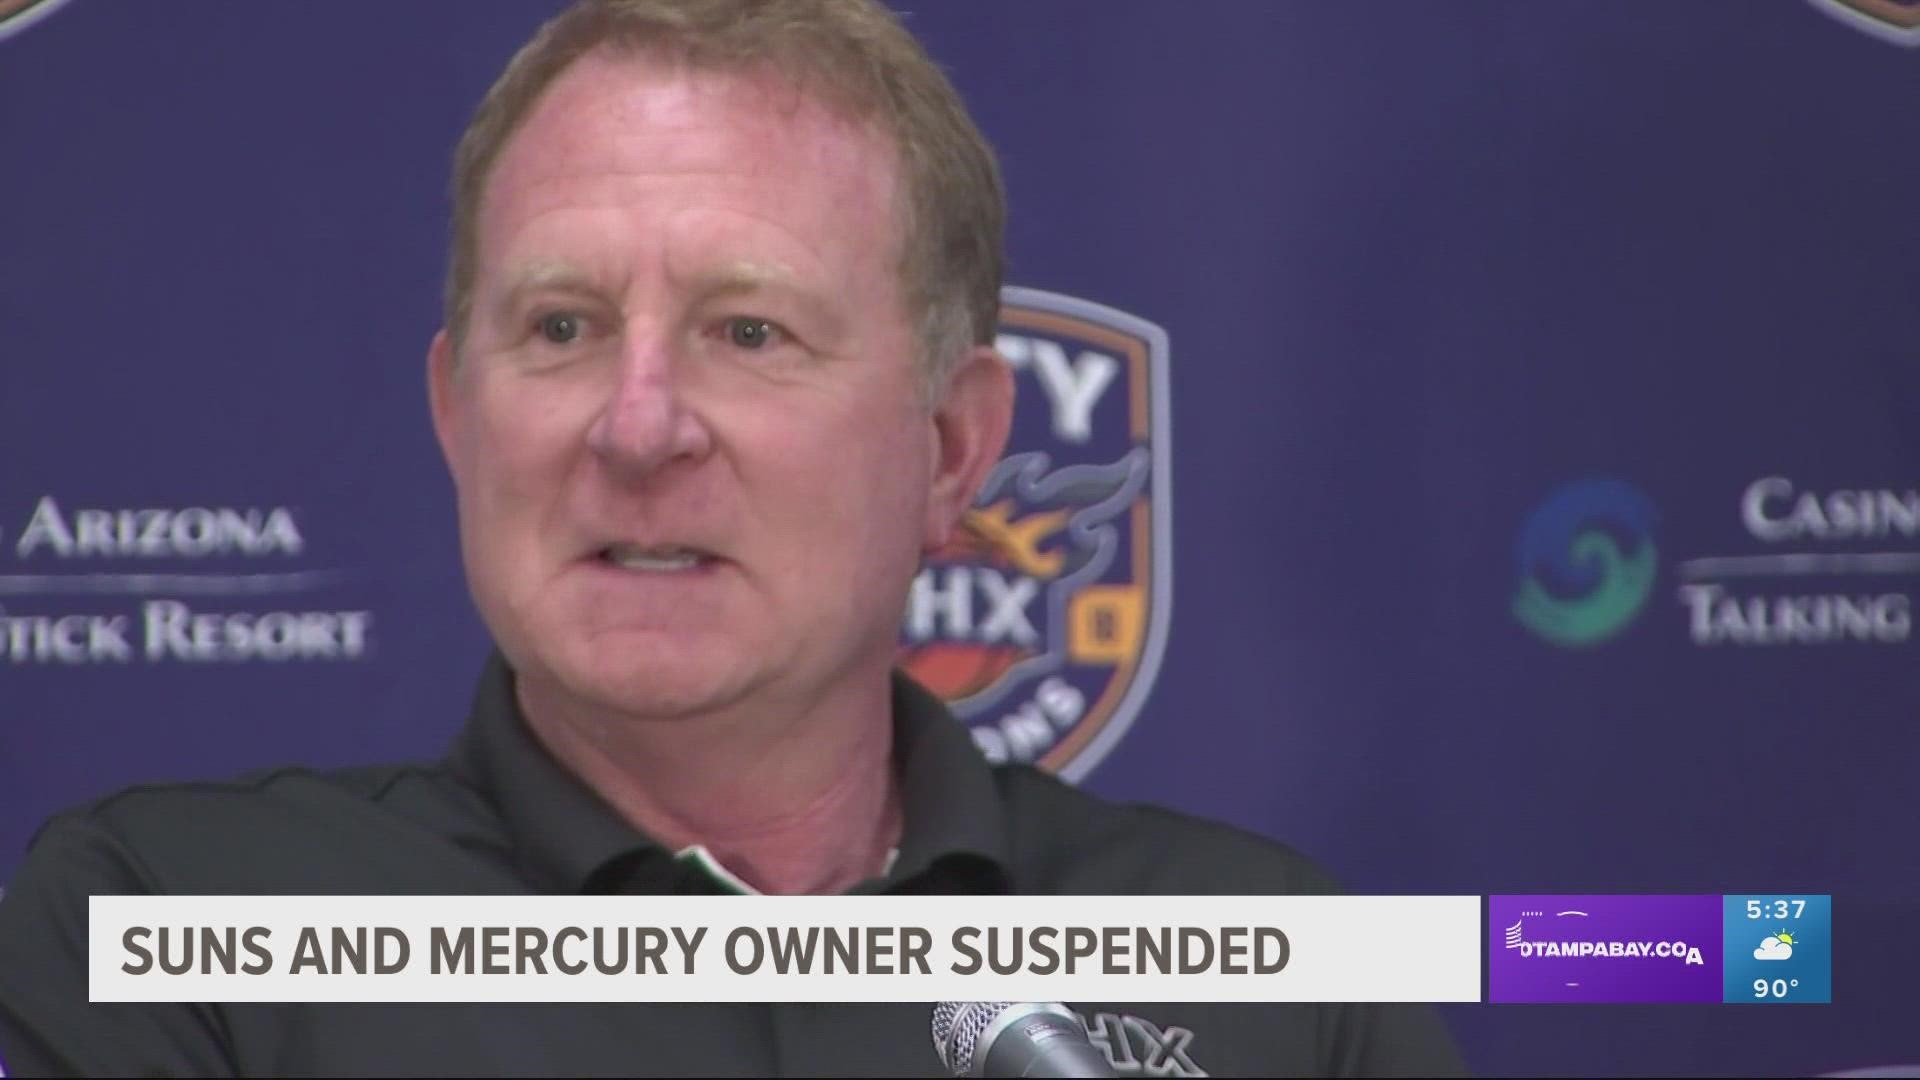 The announcement comes nearly a near after the NBA launched an investigation into Sarver after accusations of workplace racism and sexism.